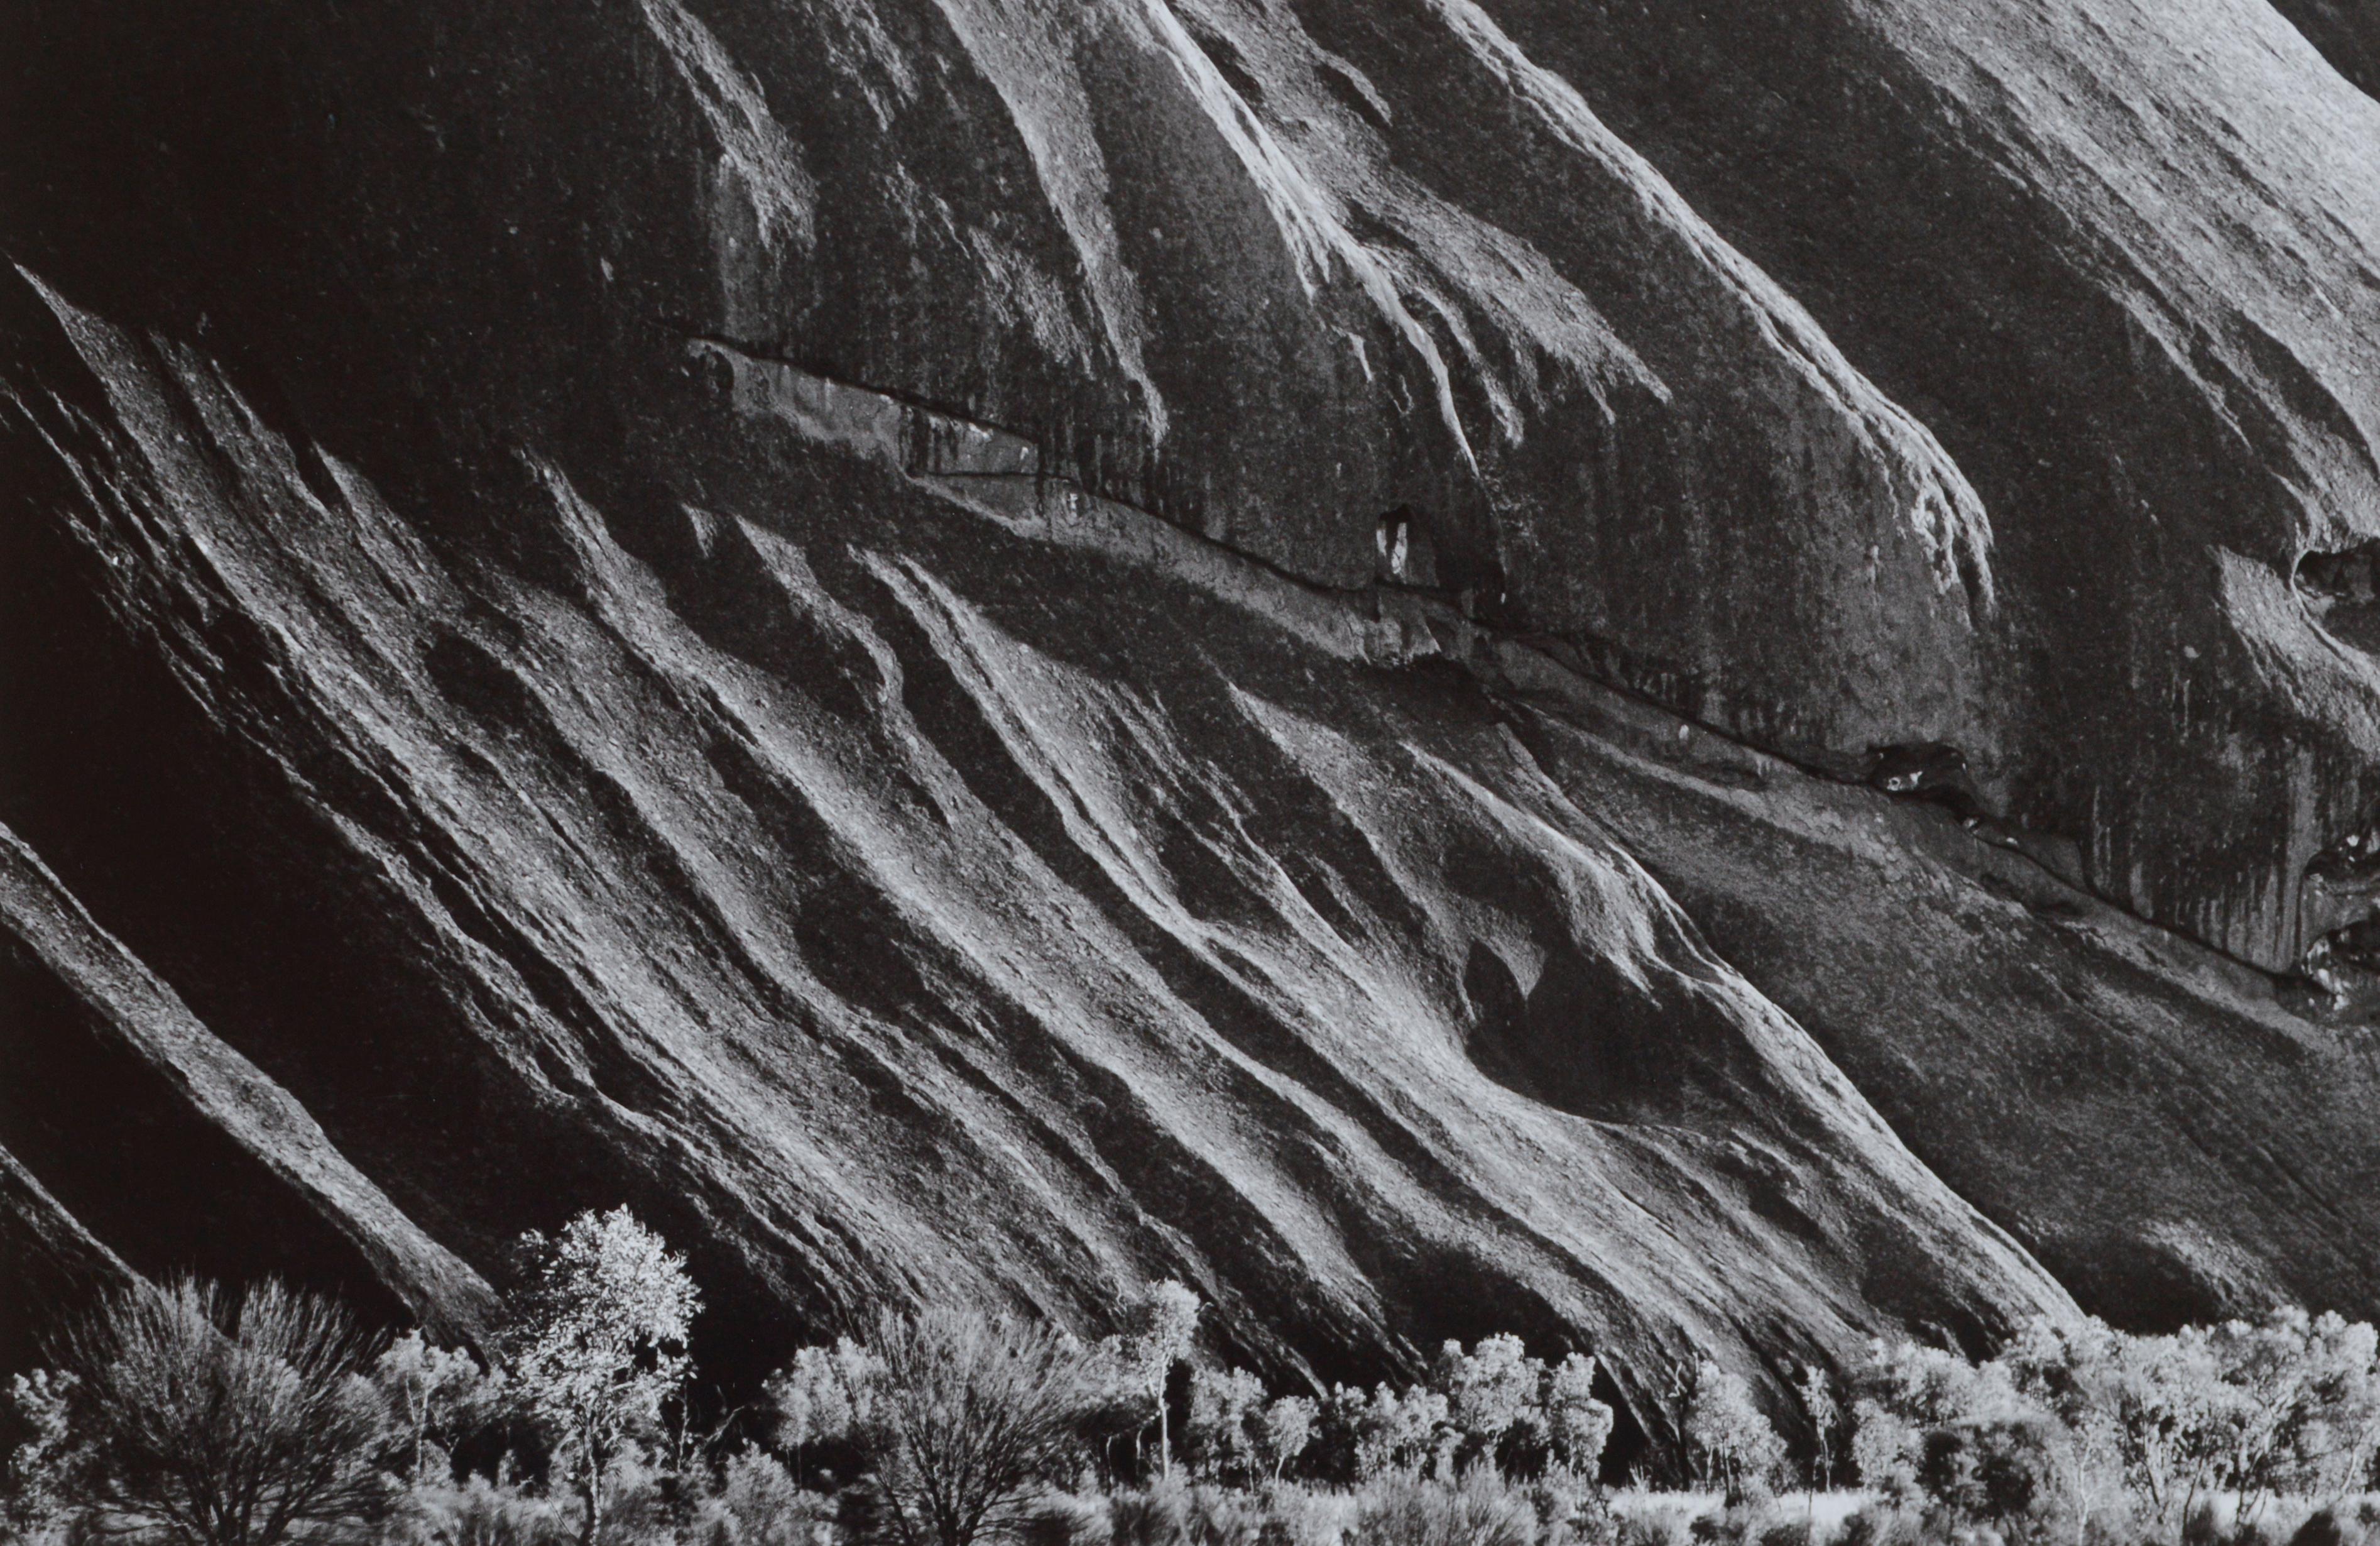 Behold nature's stunning beauty in this black & white hand signed landscape photograph of beautiful Ayers Rock in Australia, showcasing the elegant curvature of the dramatic cliffside and the its incredible scale juxtaposed to the small shrubs